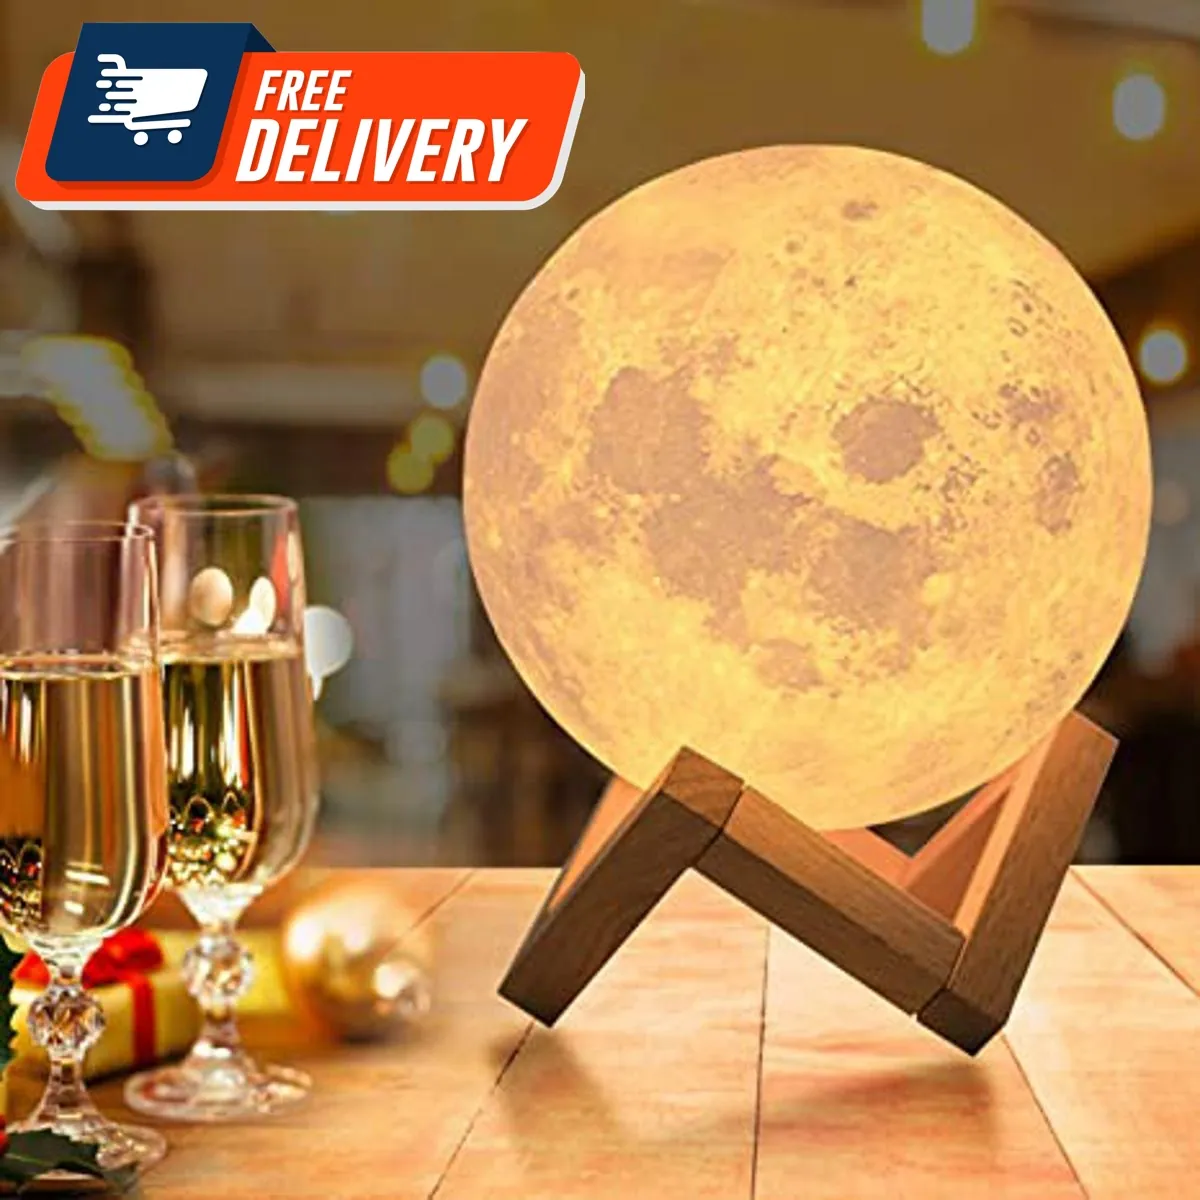 Rechargeable 3D Moon Lamp With Remote -18 CM